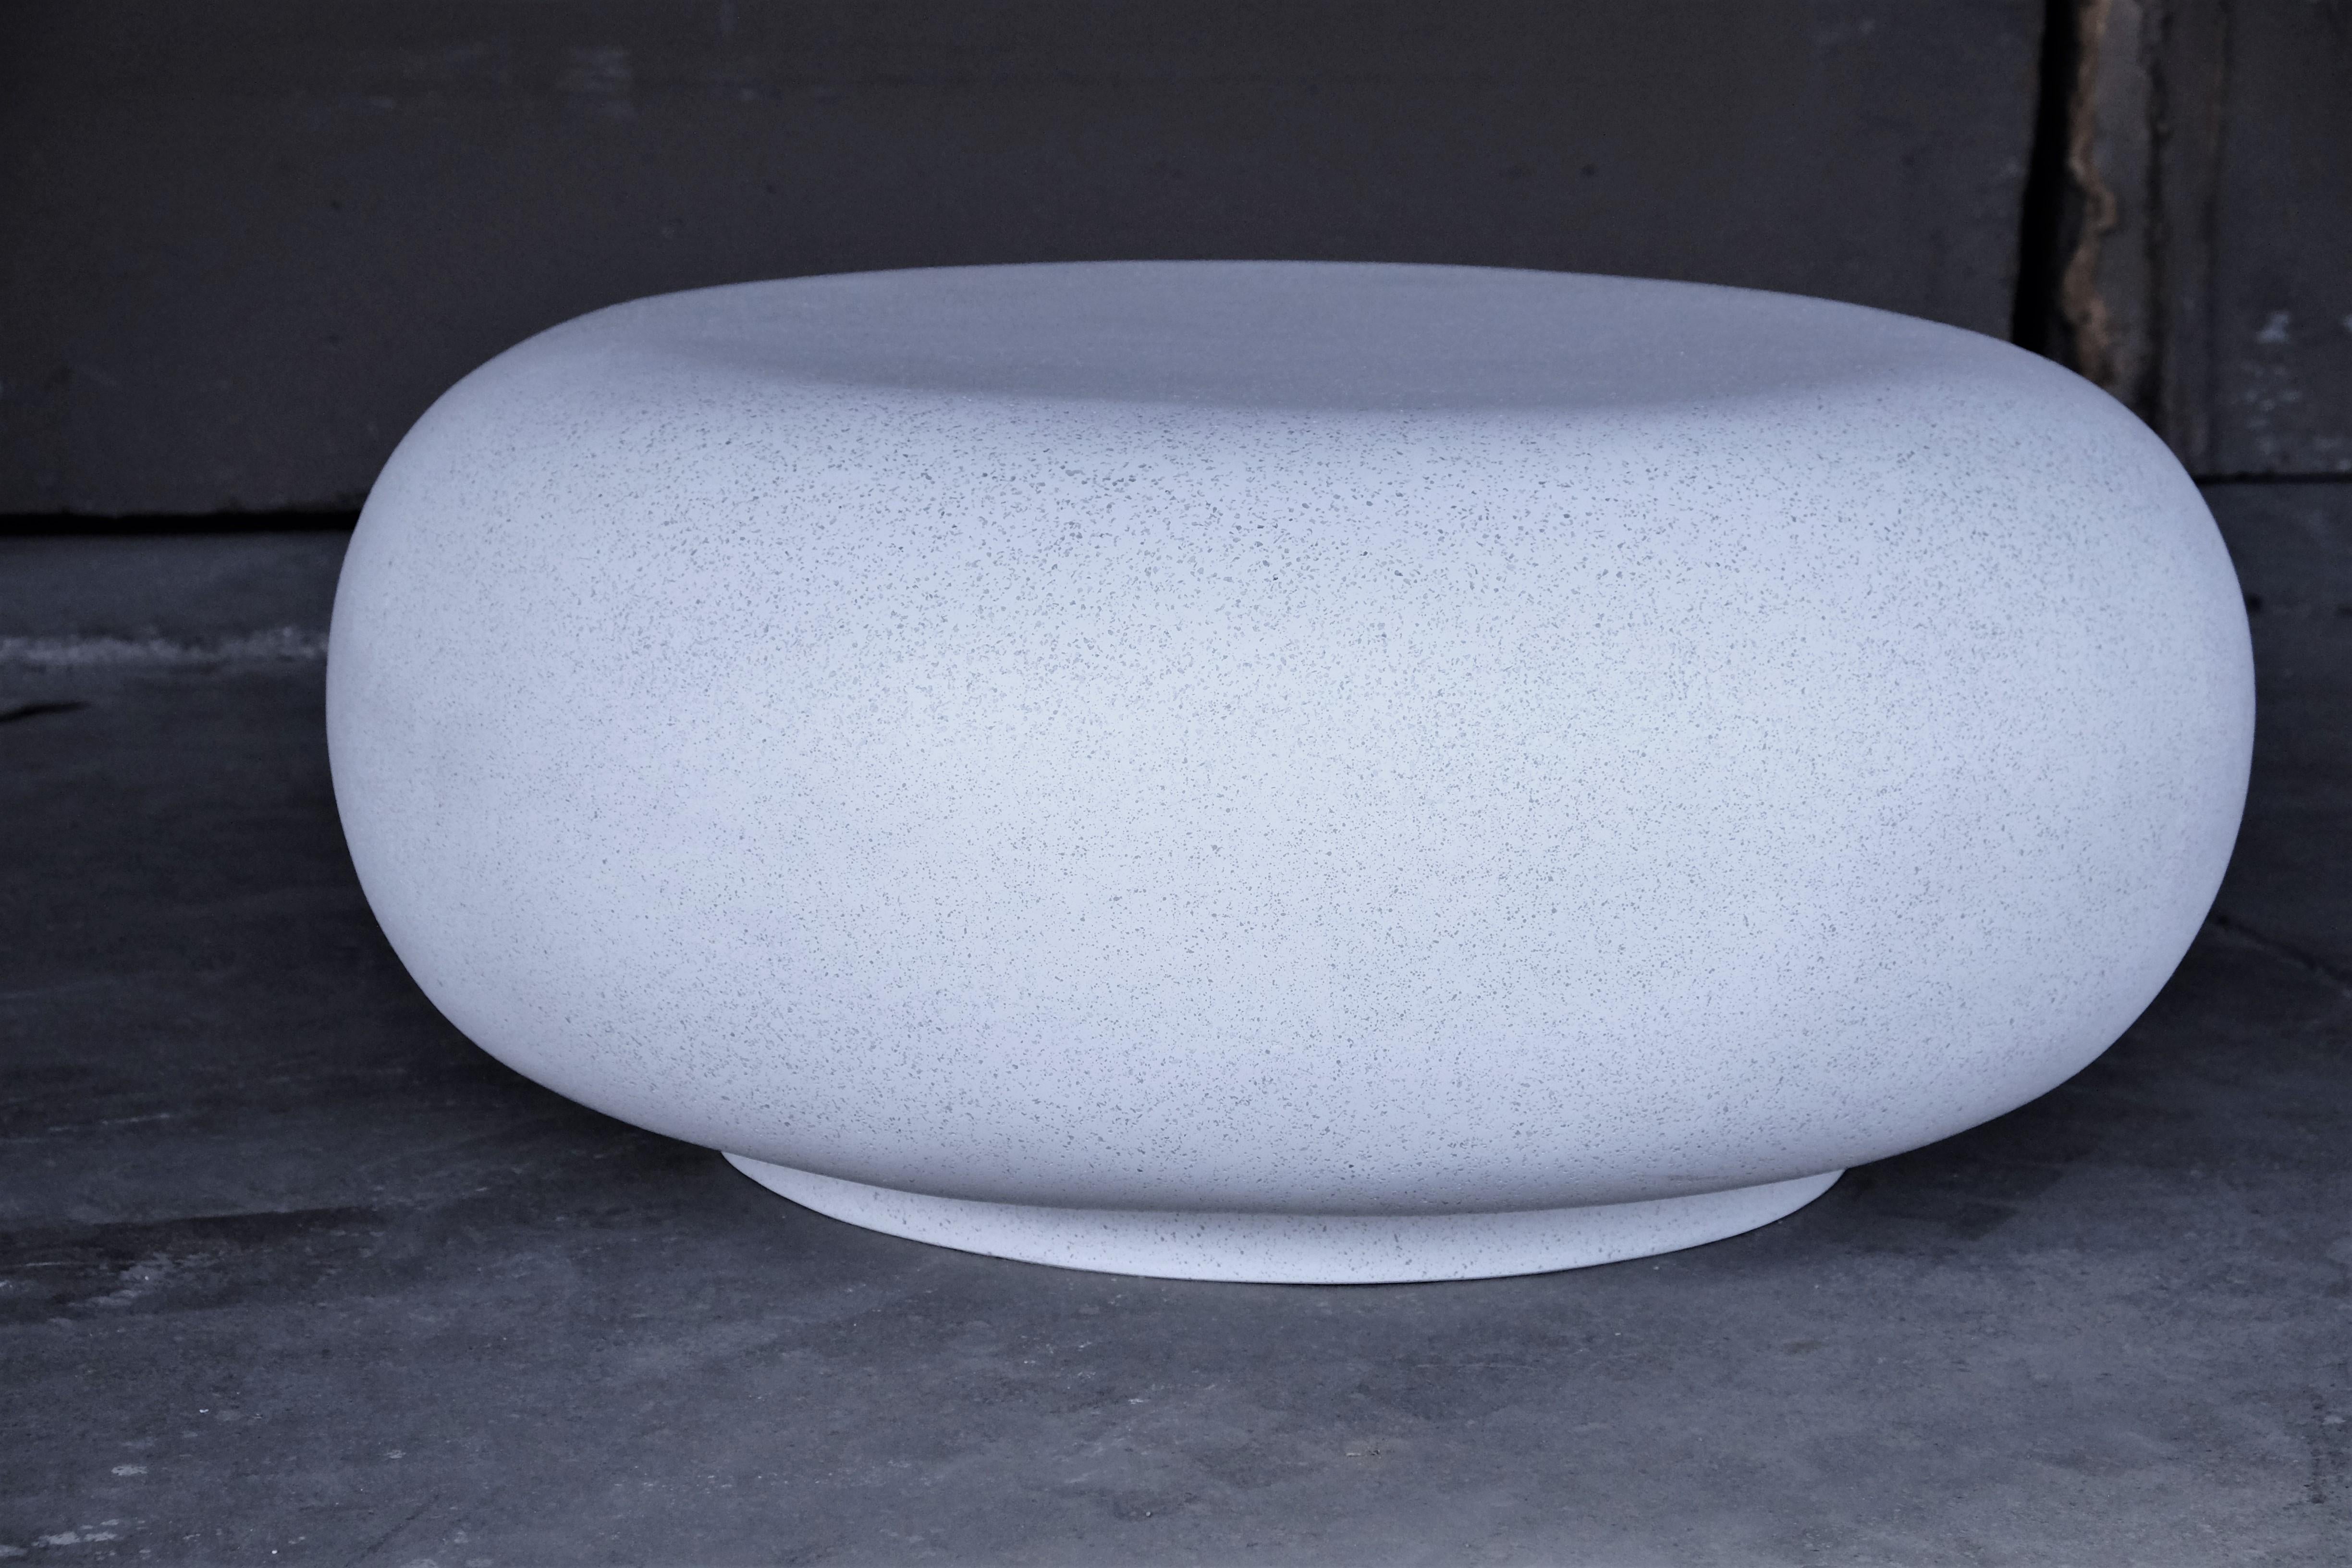 The Pebble table is an elegant cocktail table with an organic form. Pictured in our white stone finish, the texture and modern look of concrete make it appropriate for a wide variety of styles and spaces.

Dimensions: Diameter 36 in. (91 cm), height